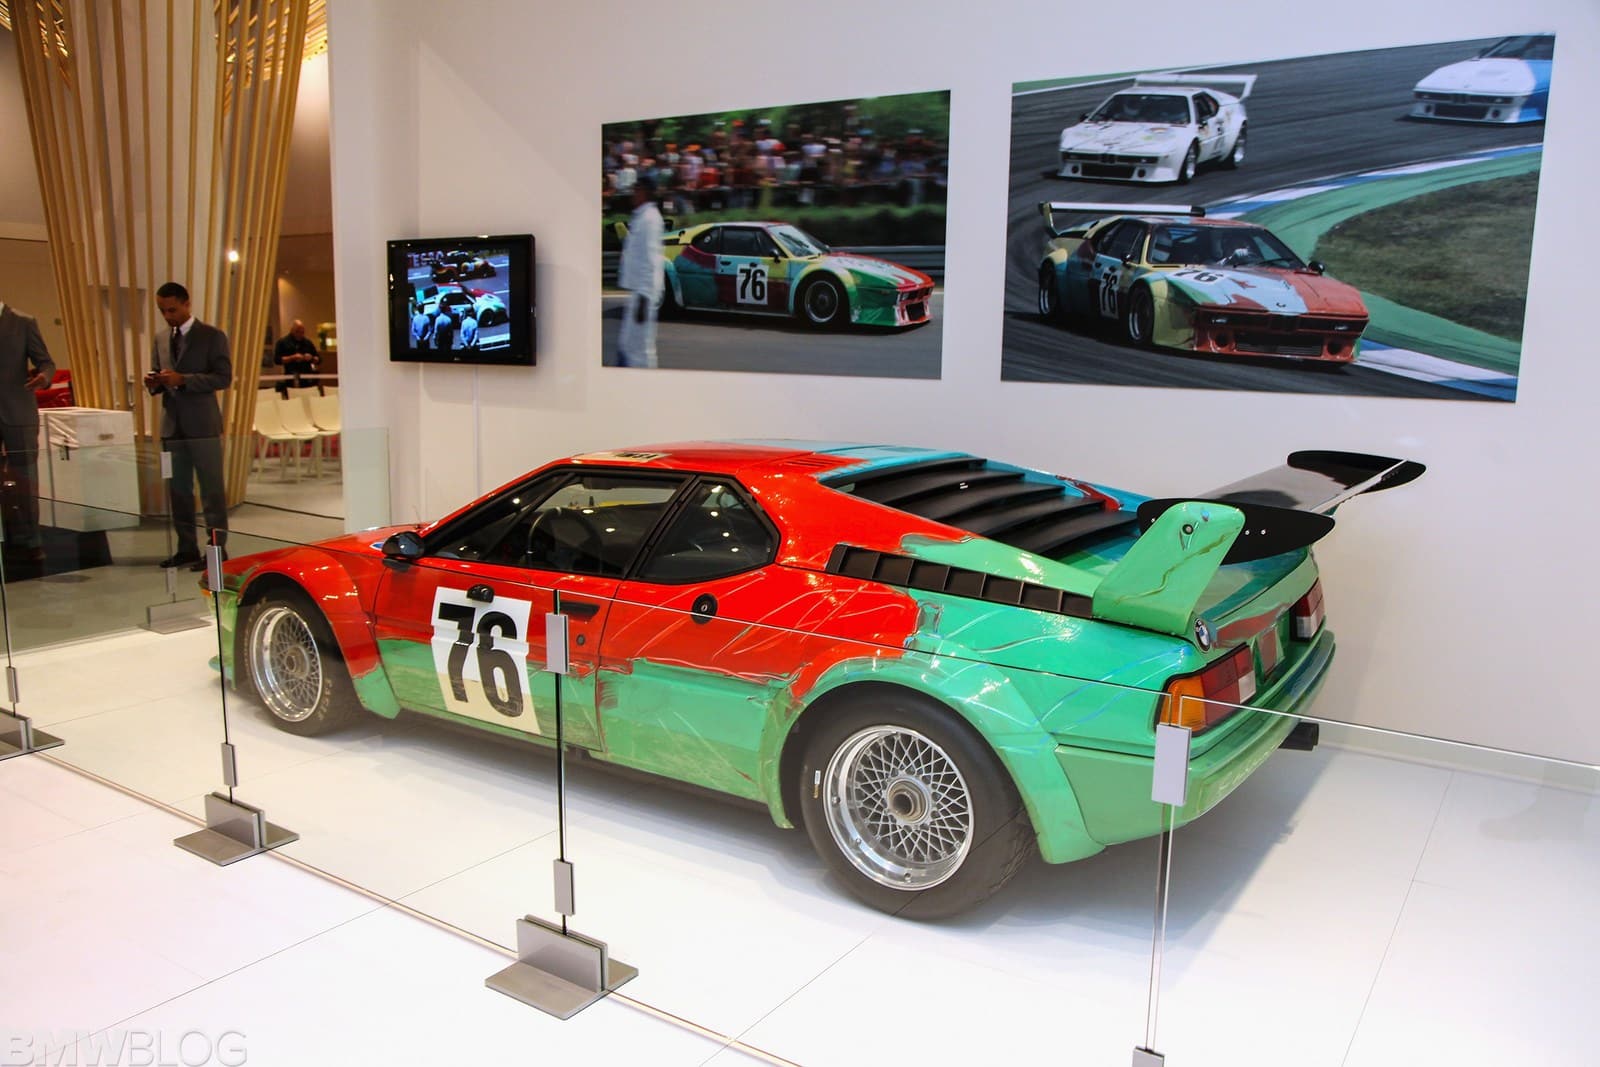 MIAMI BEACH, FL - DECEMBER 04:  BMW Art Car by Andy Warhol, 1979 BMW M1 on display at the VIP lounge at Art Basel Miami Beach on December 4, 2013 in Miami Beach, Florida.  (Photo by Donald Bowers/Getty Images for BMW)